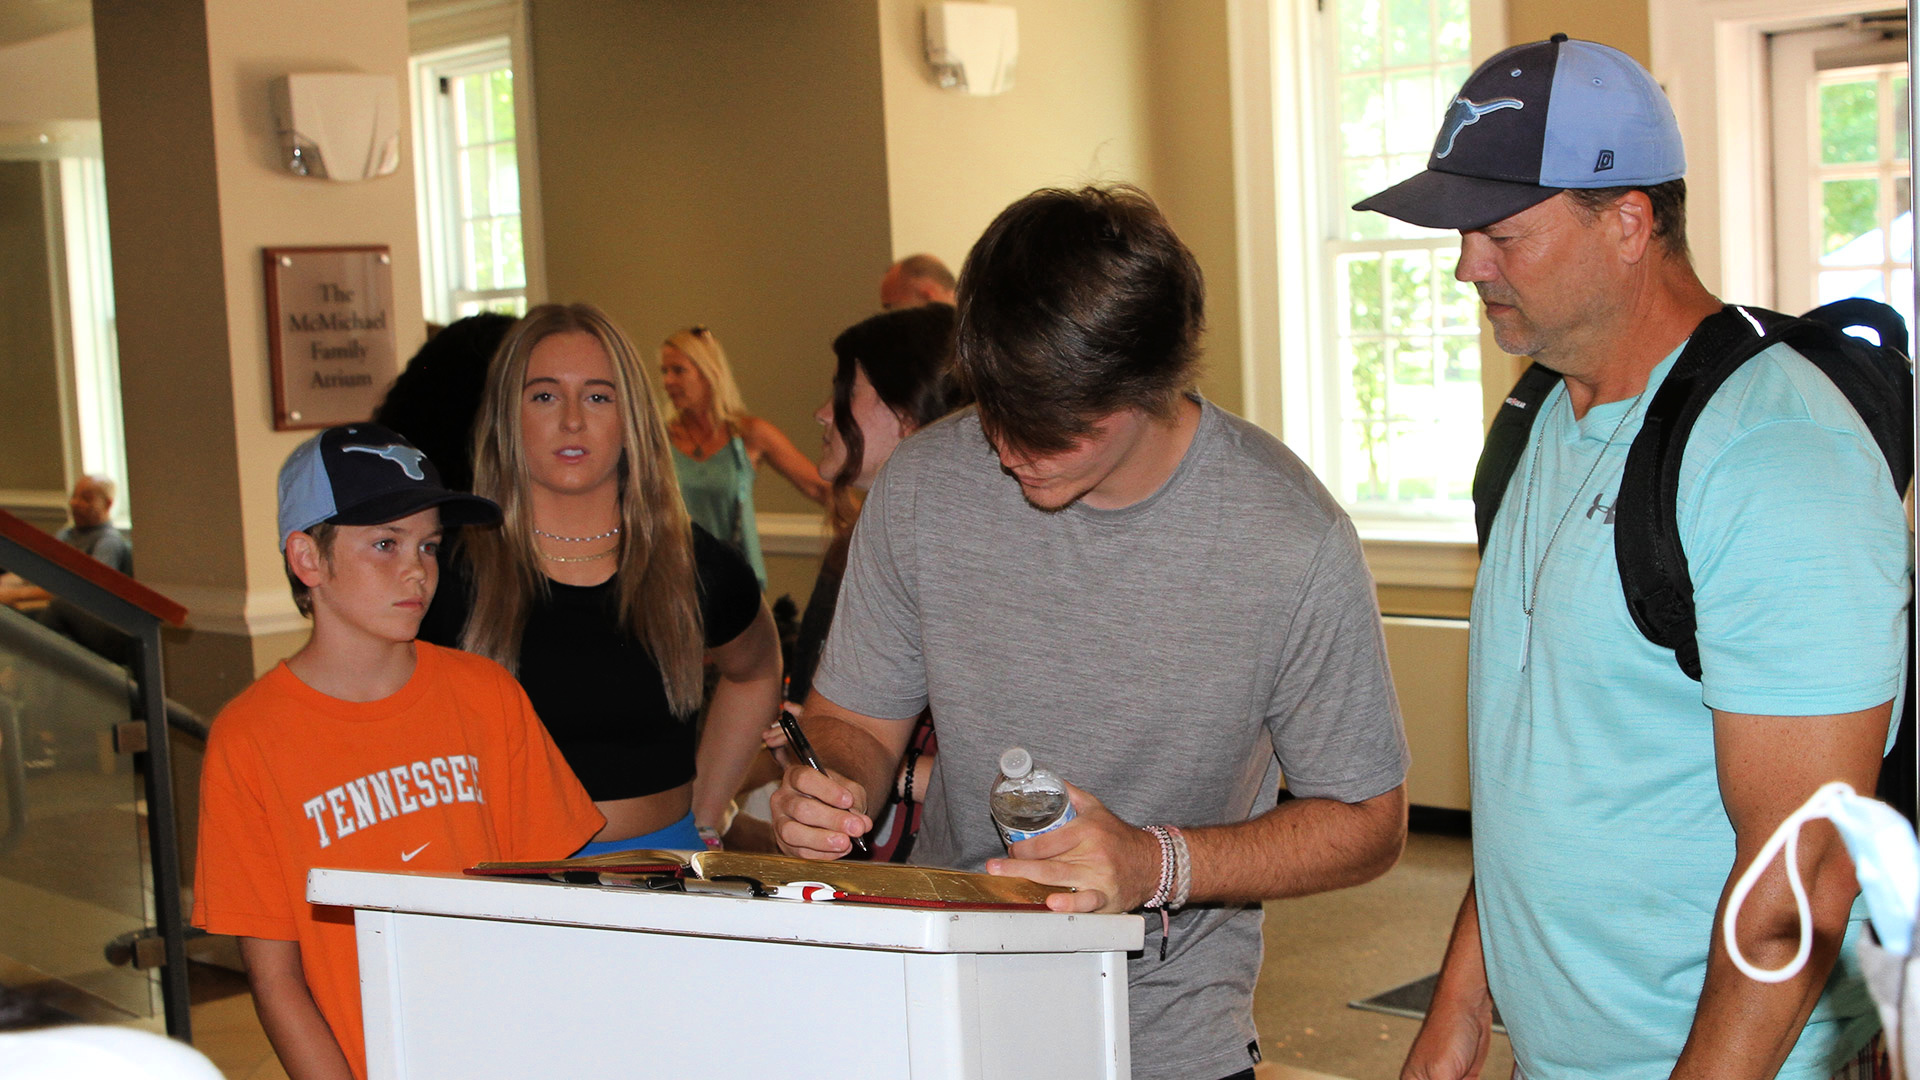 A student surrounded by family members signs the check-in book in Founders Hall on Move-in Day.